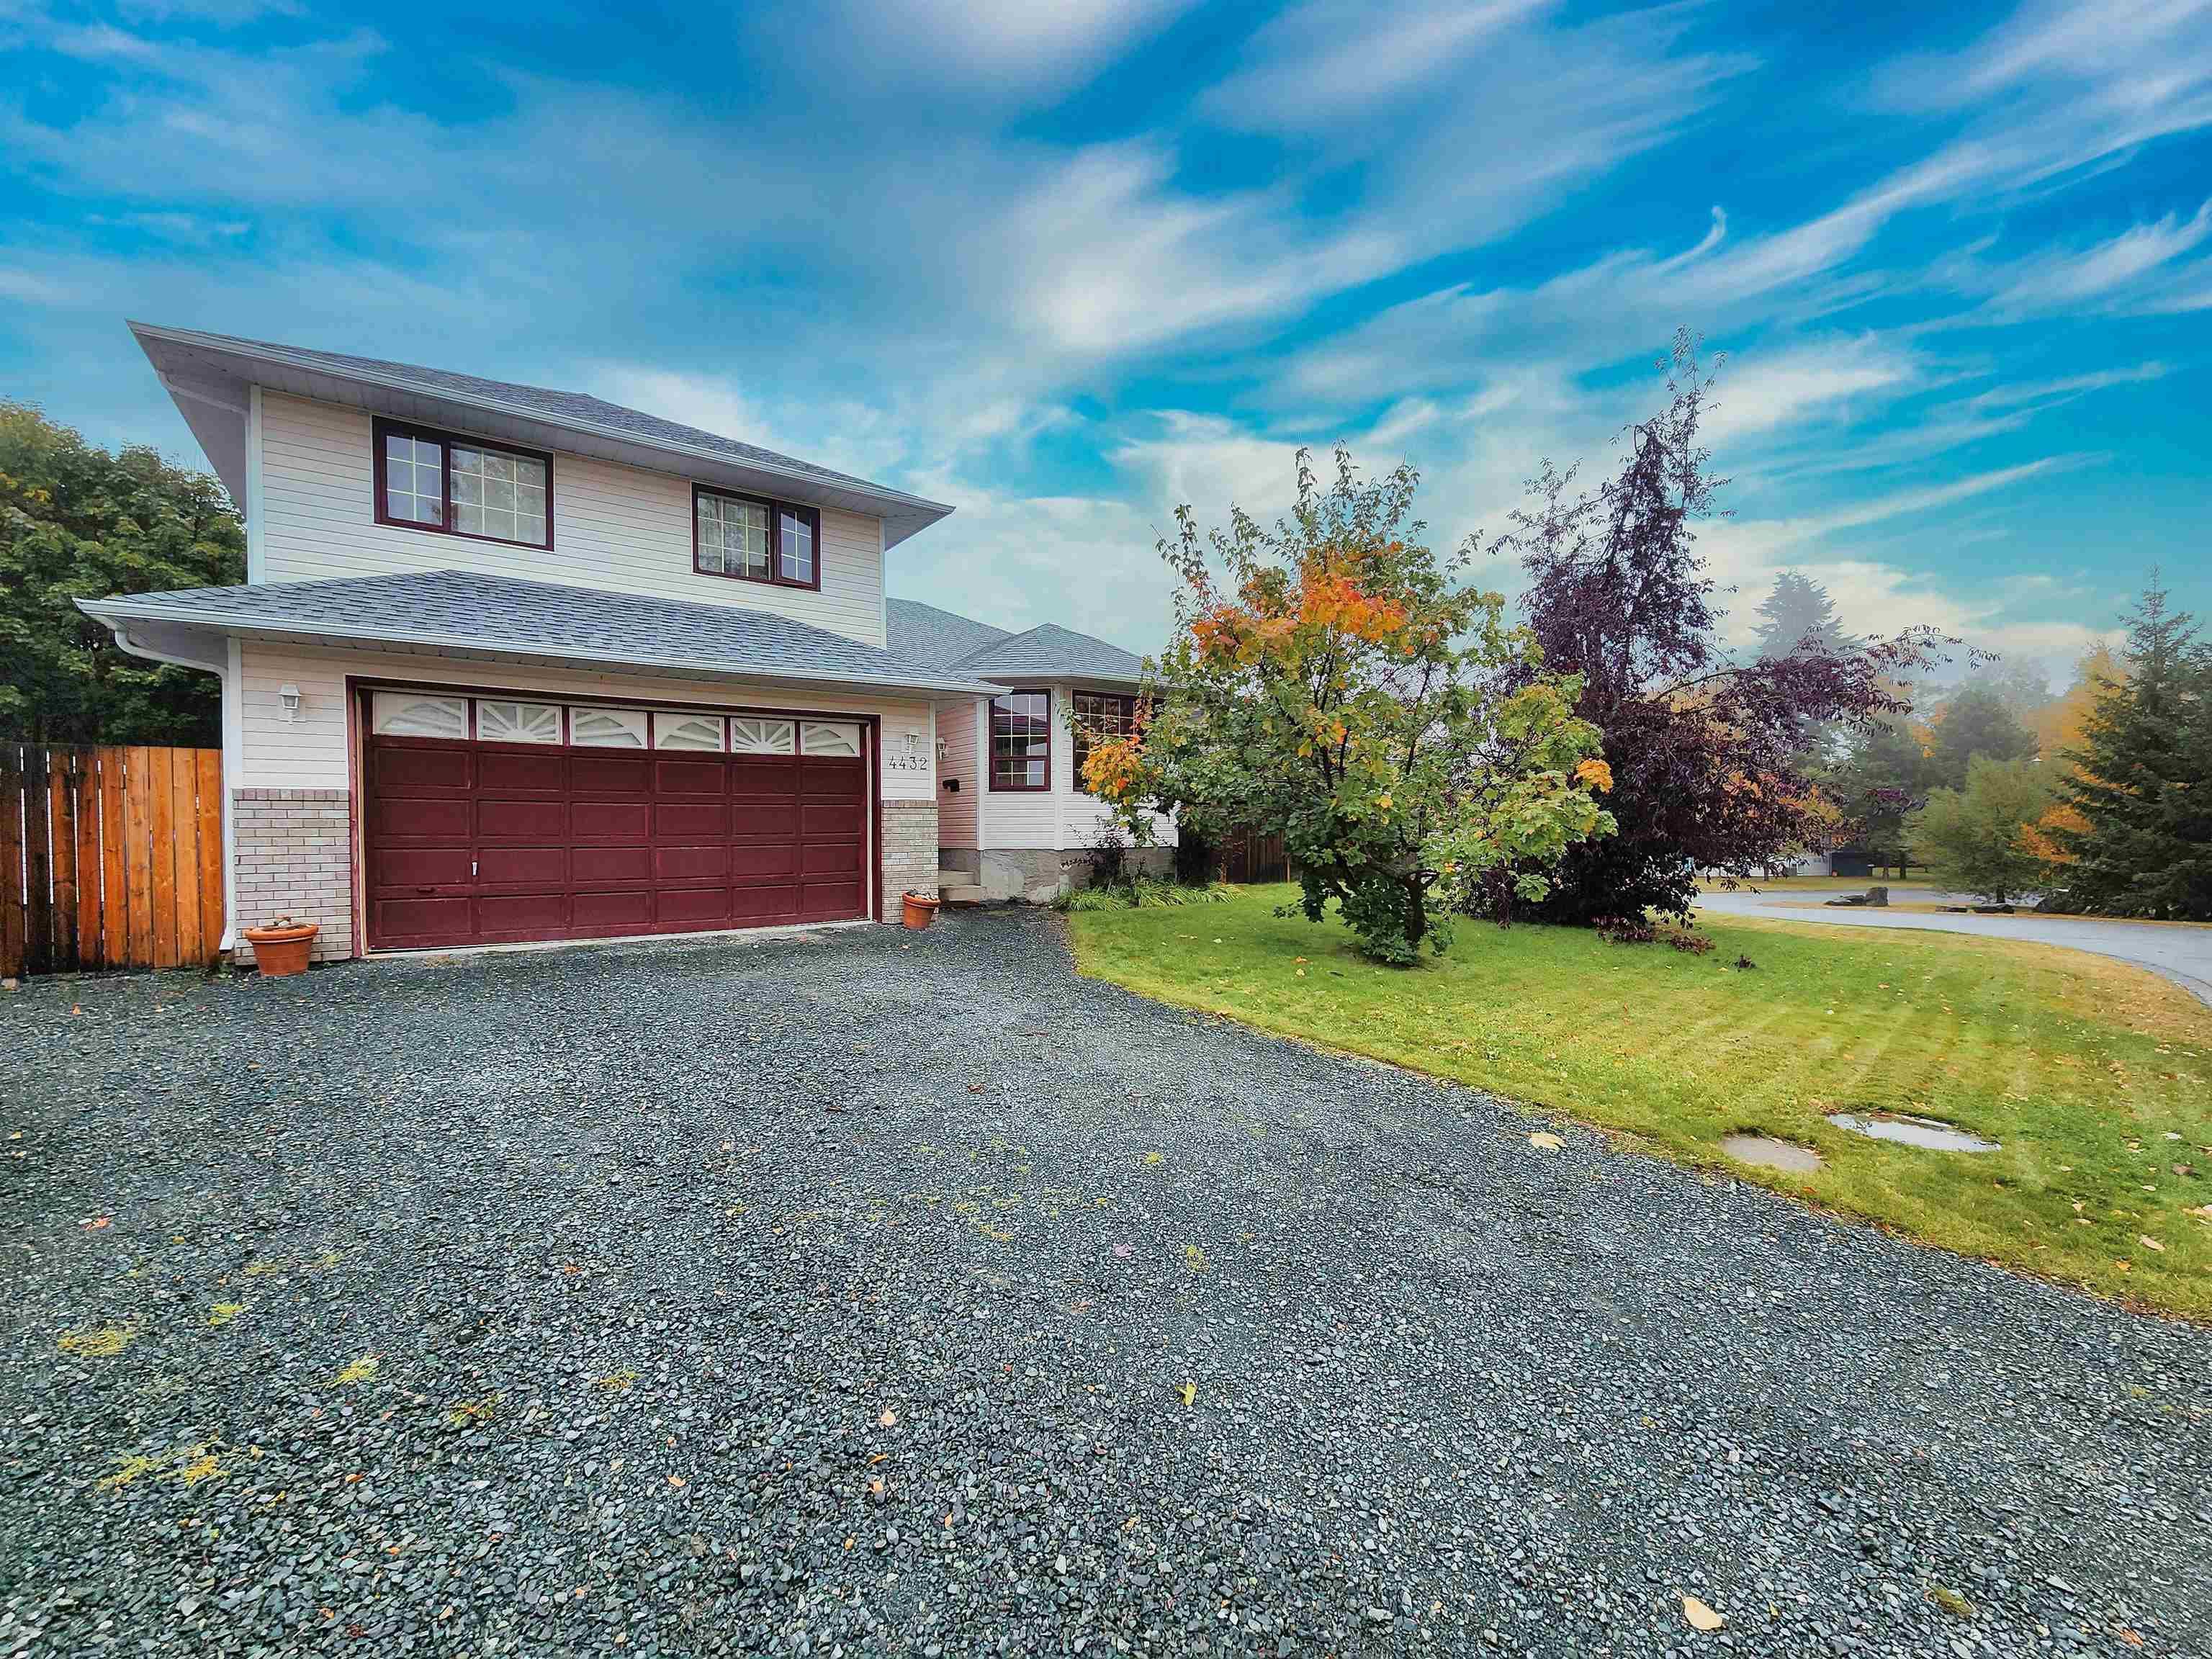 New property listed in Hart Highlands, PG City North